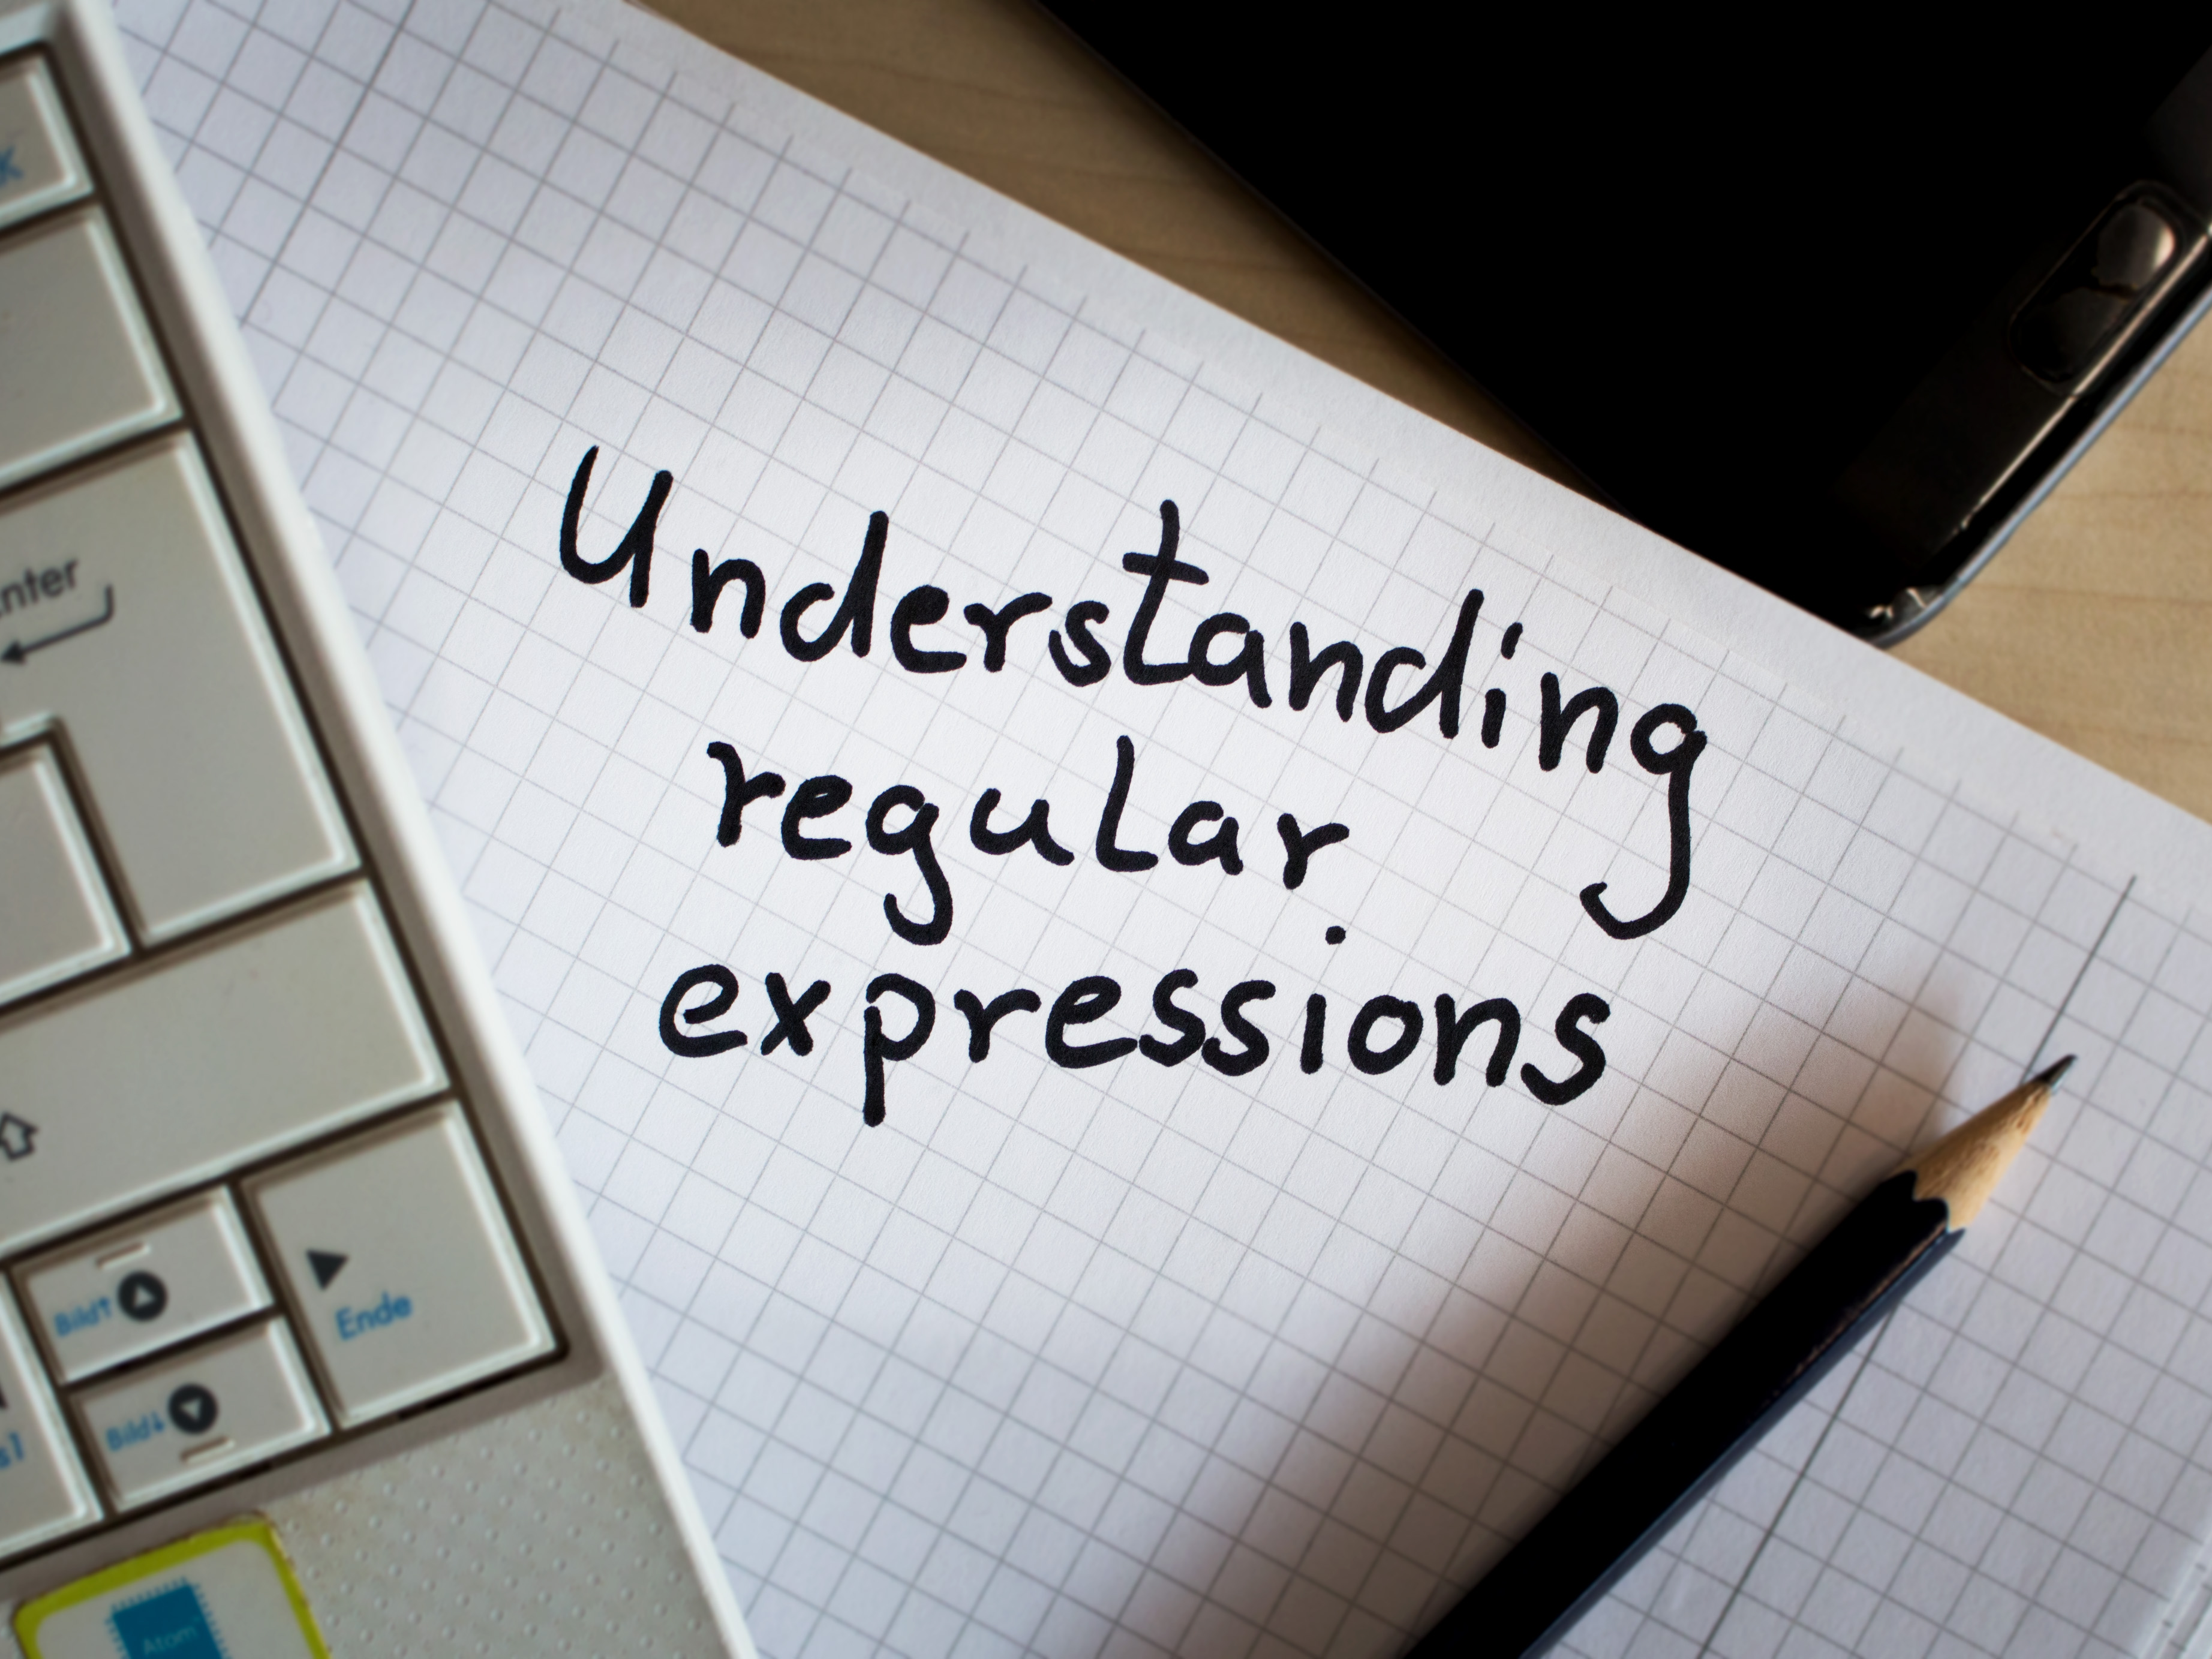 [Translate to Englisch:] Understanding regular expressions written on note next to keyboard and pencil